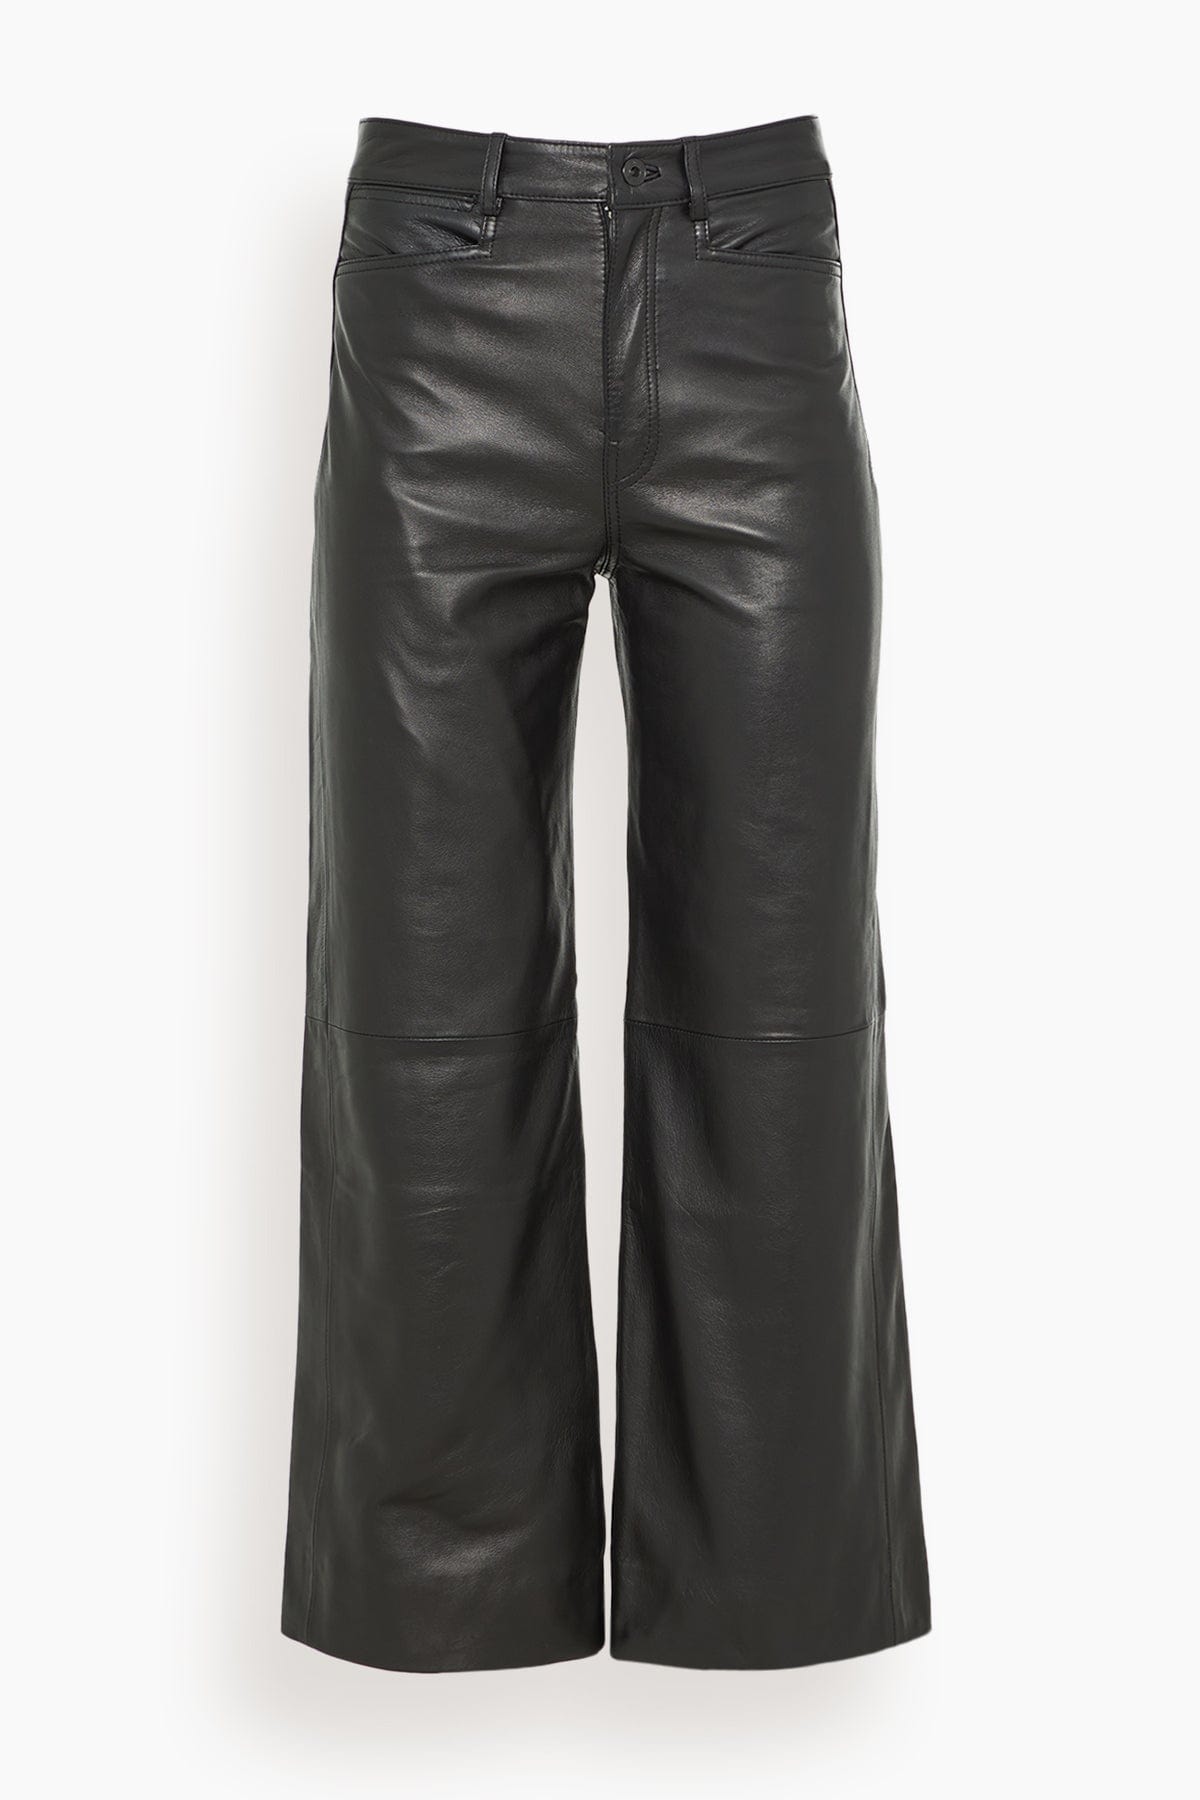 Proenza Schouler White Label Pants Leather Culottes in Black